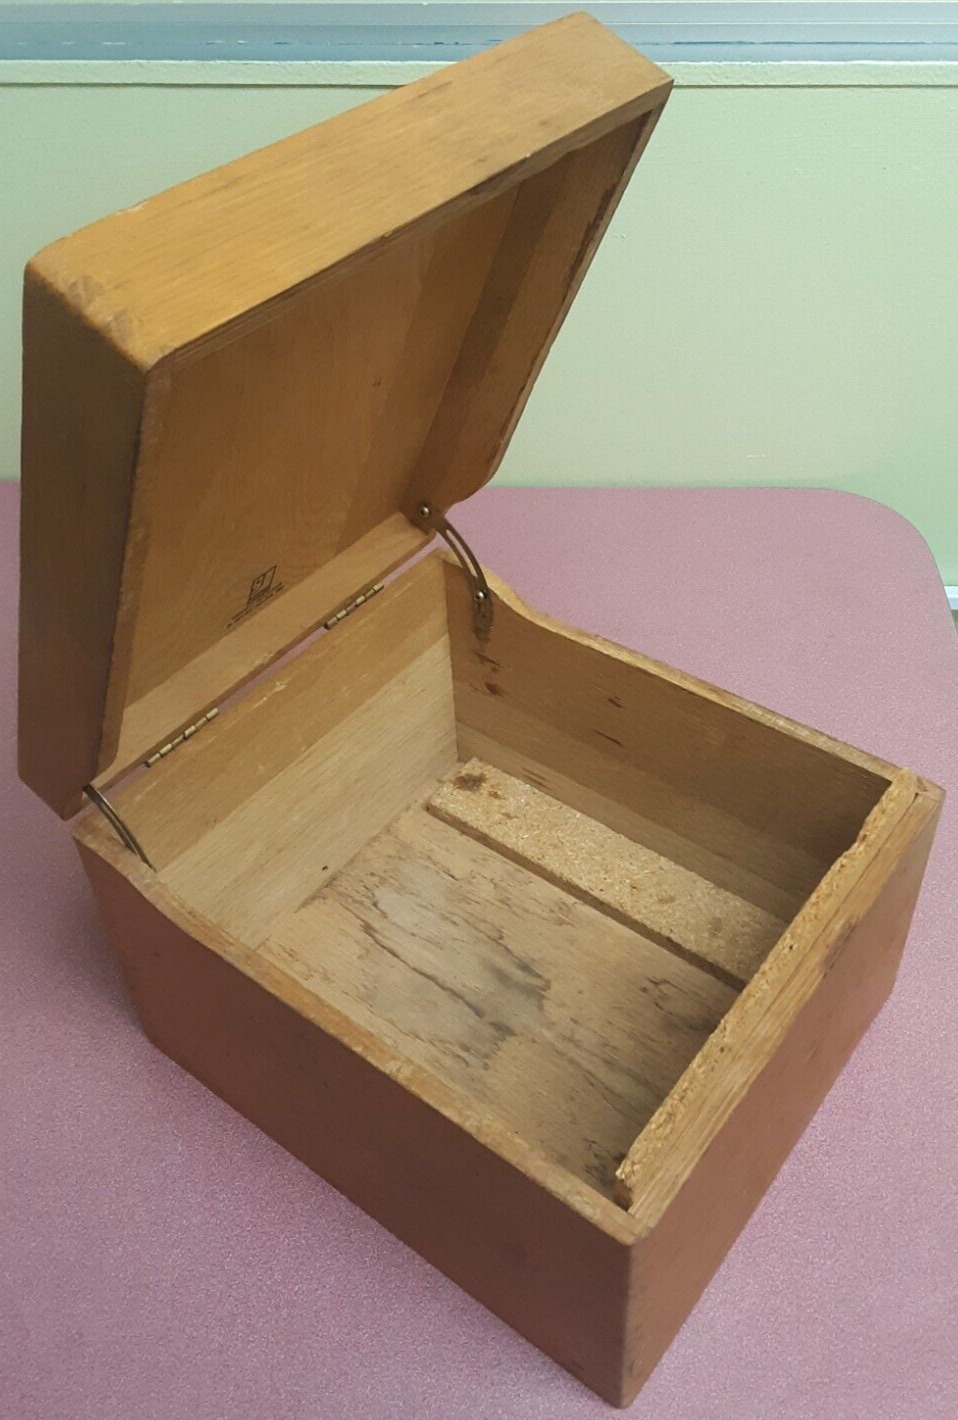 Wooden Oak File, Recipe, or Index Cards Box w/ Dovetail Corners 10x9x6.5”